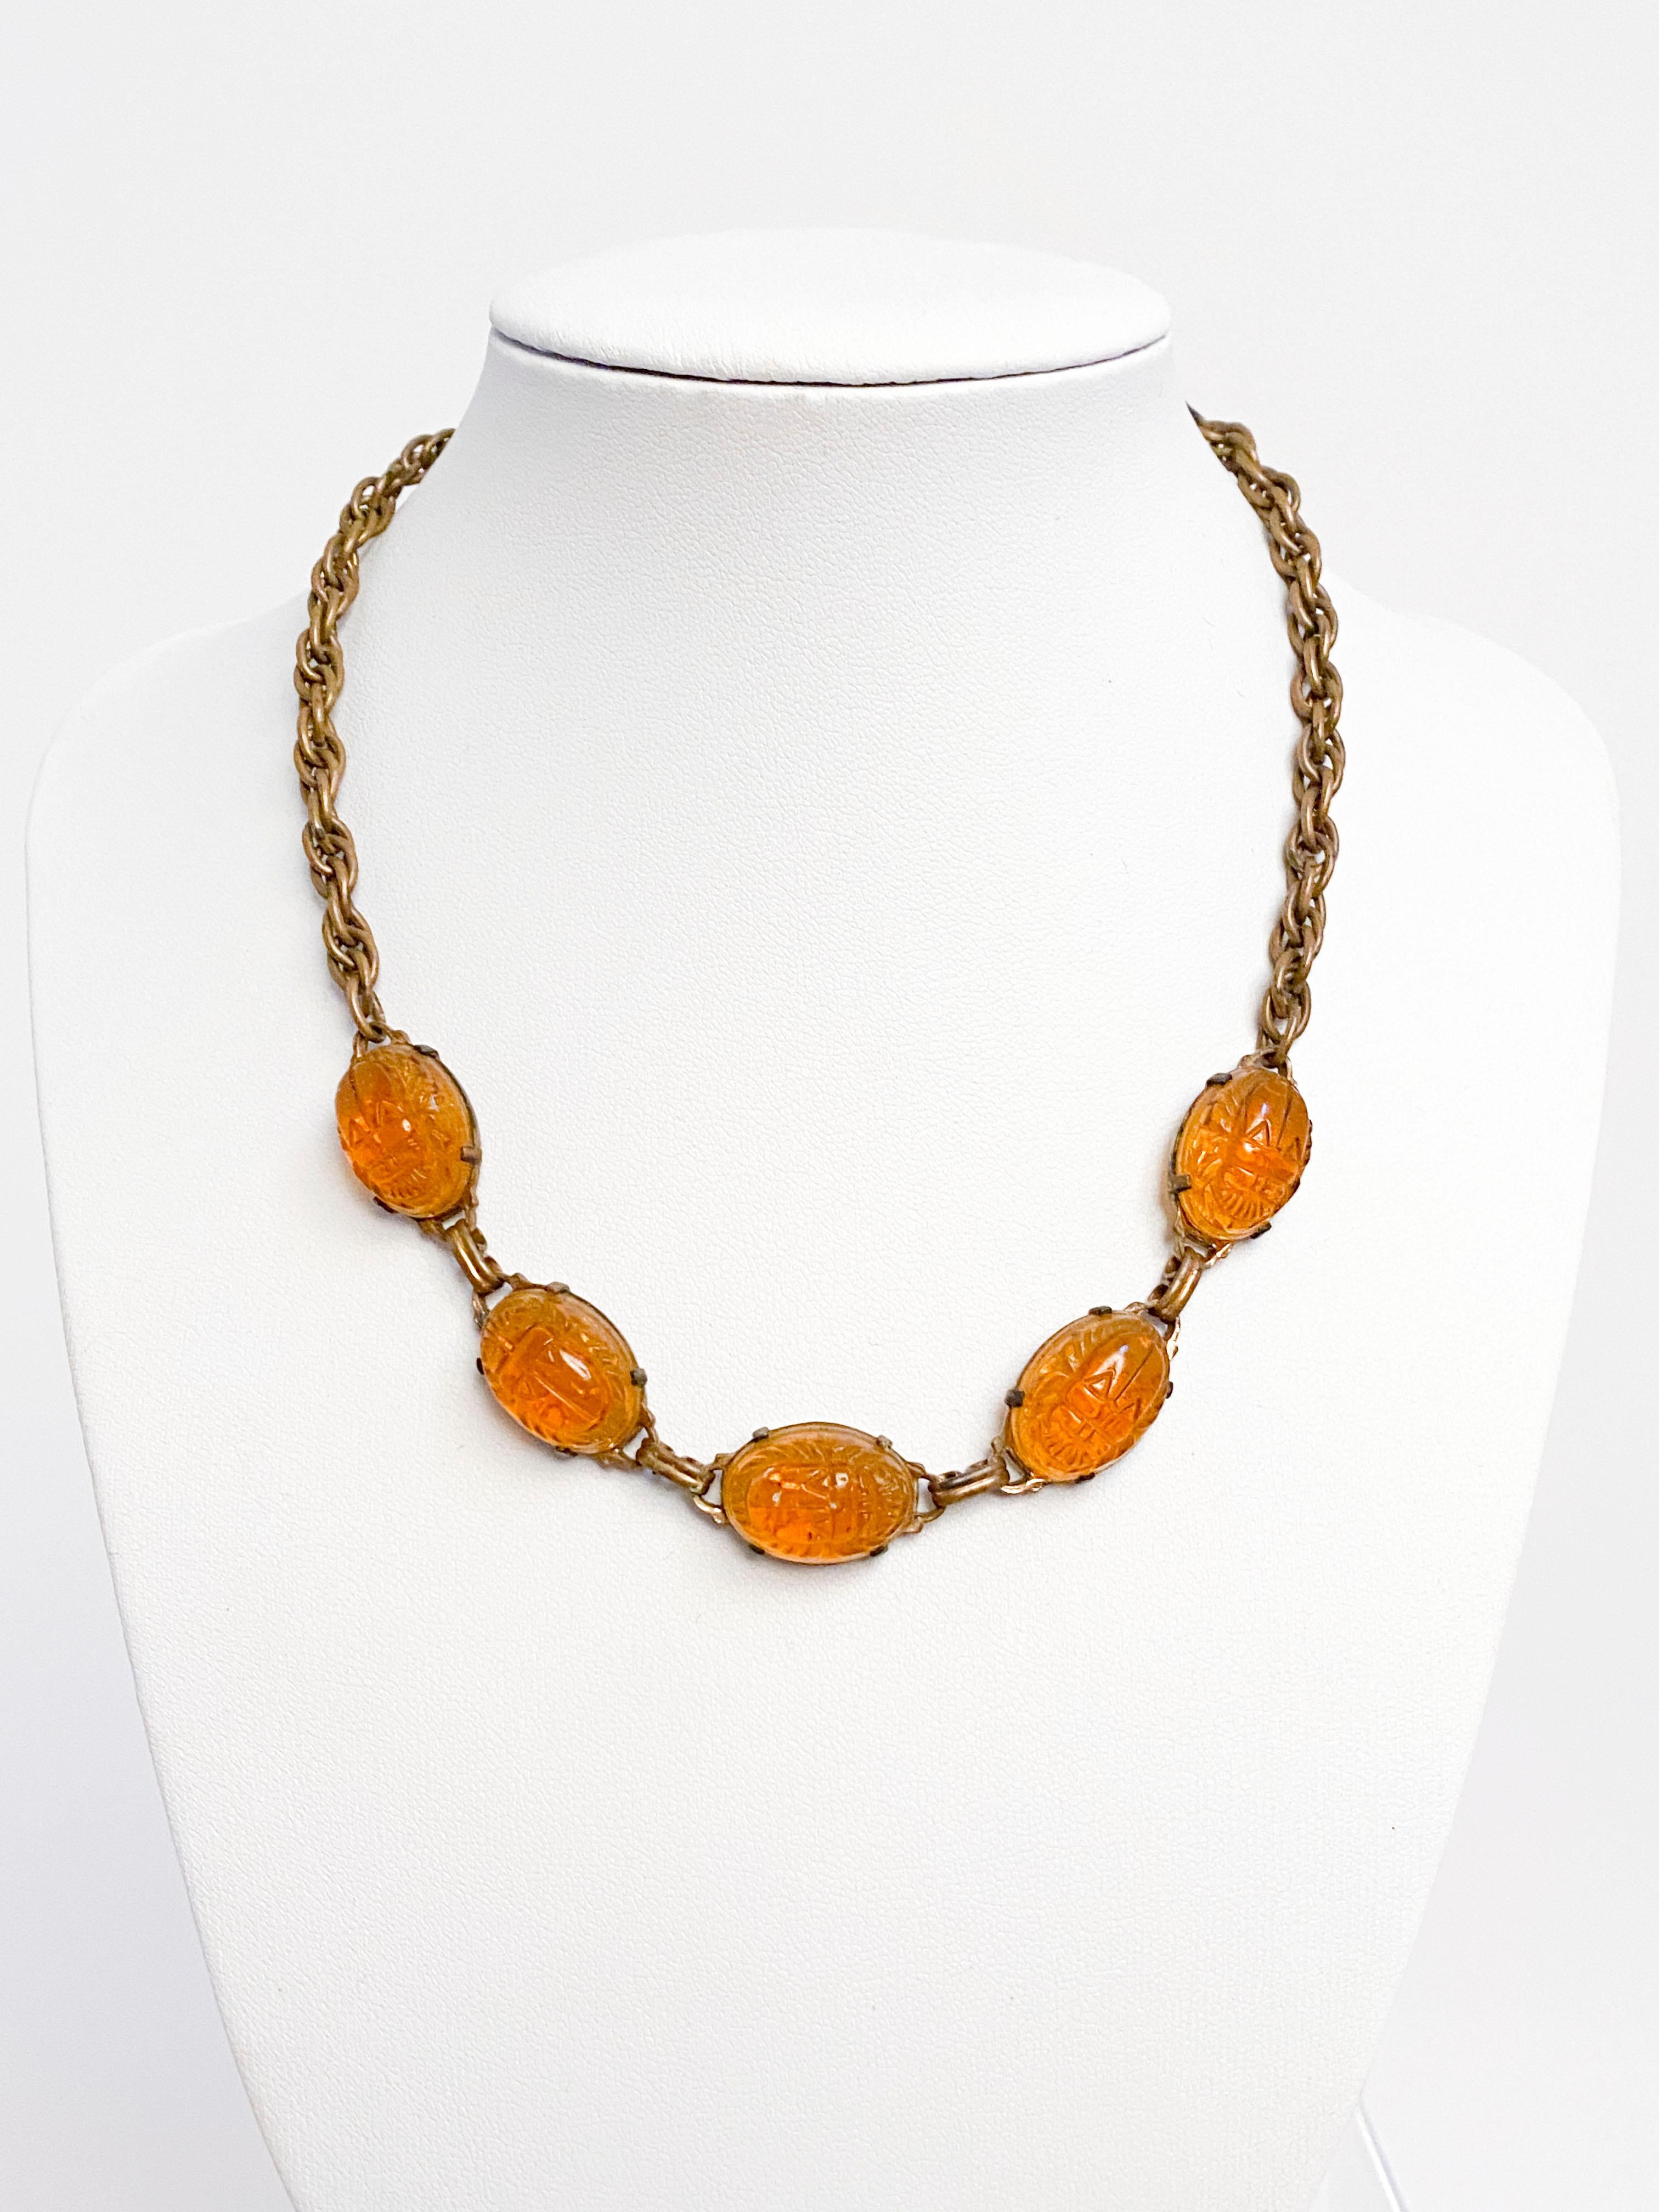 1920s Art deco Egyptian Revival brass necklace featuring five amber-colored scarab beetle art glass pieces. 